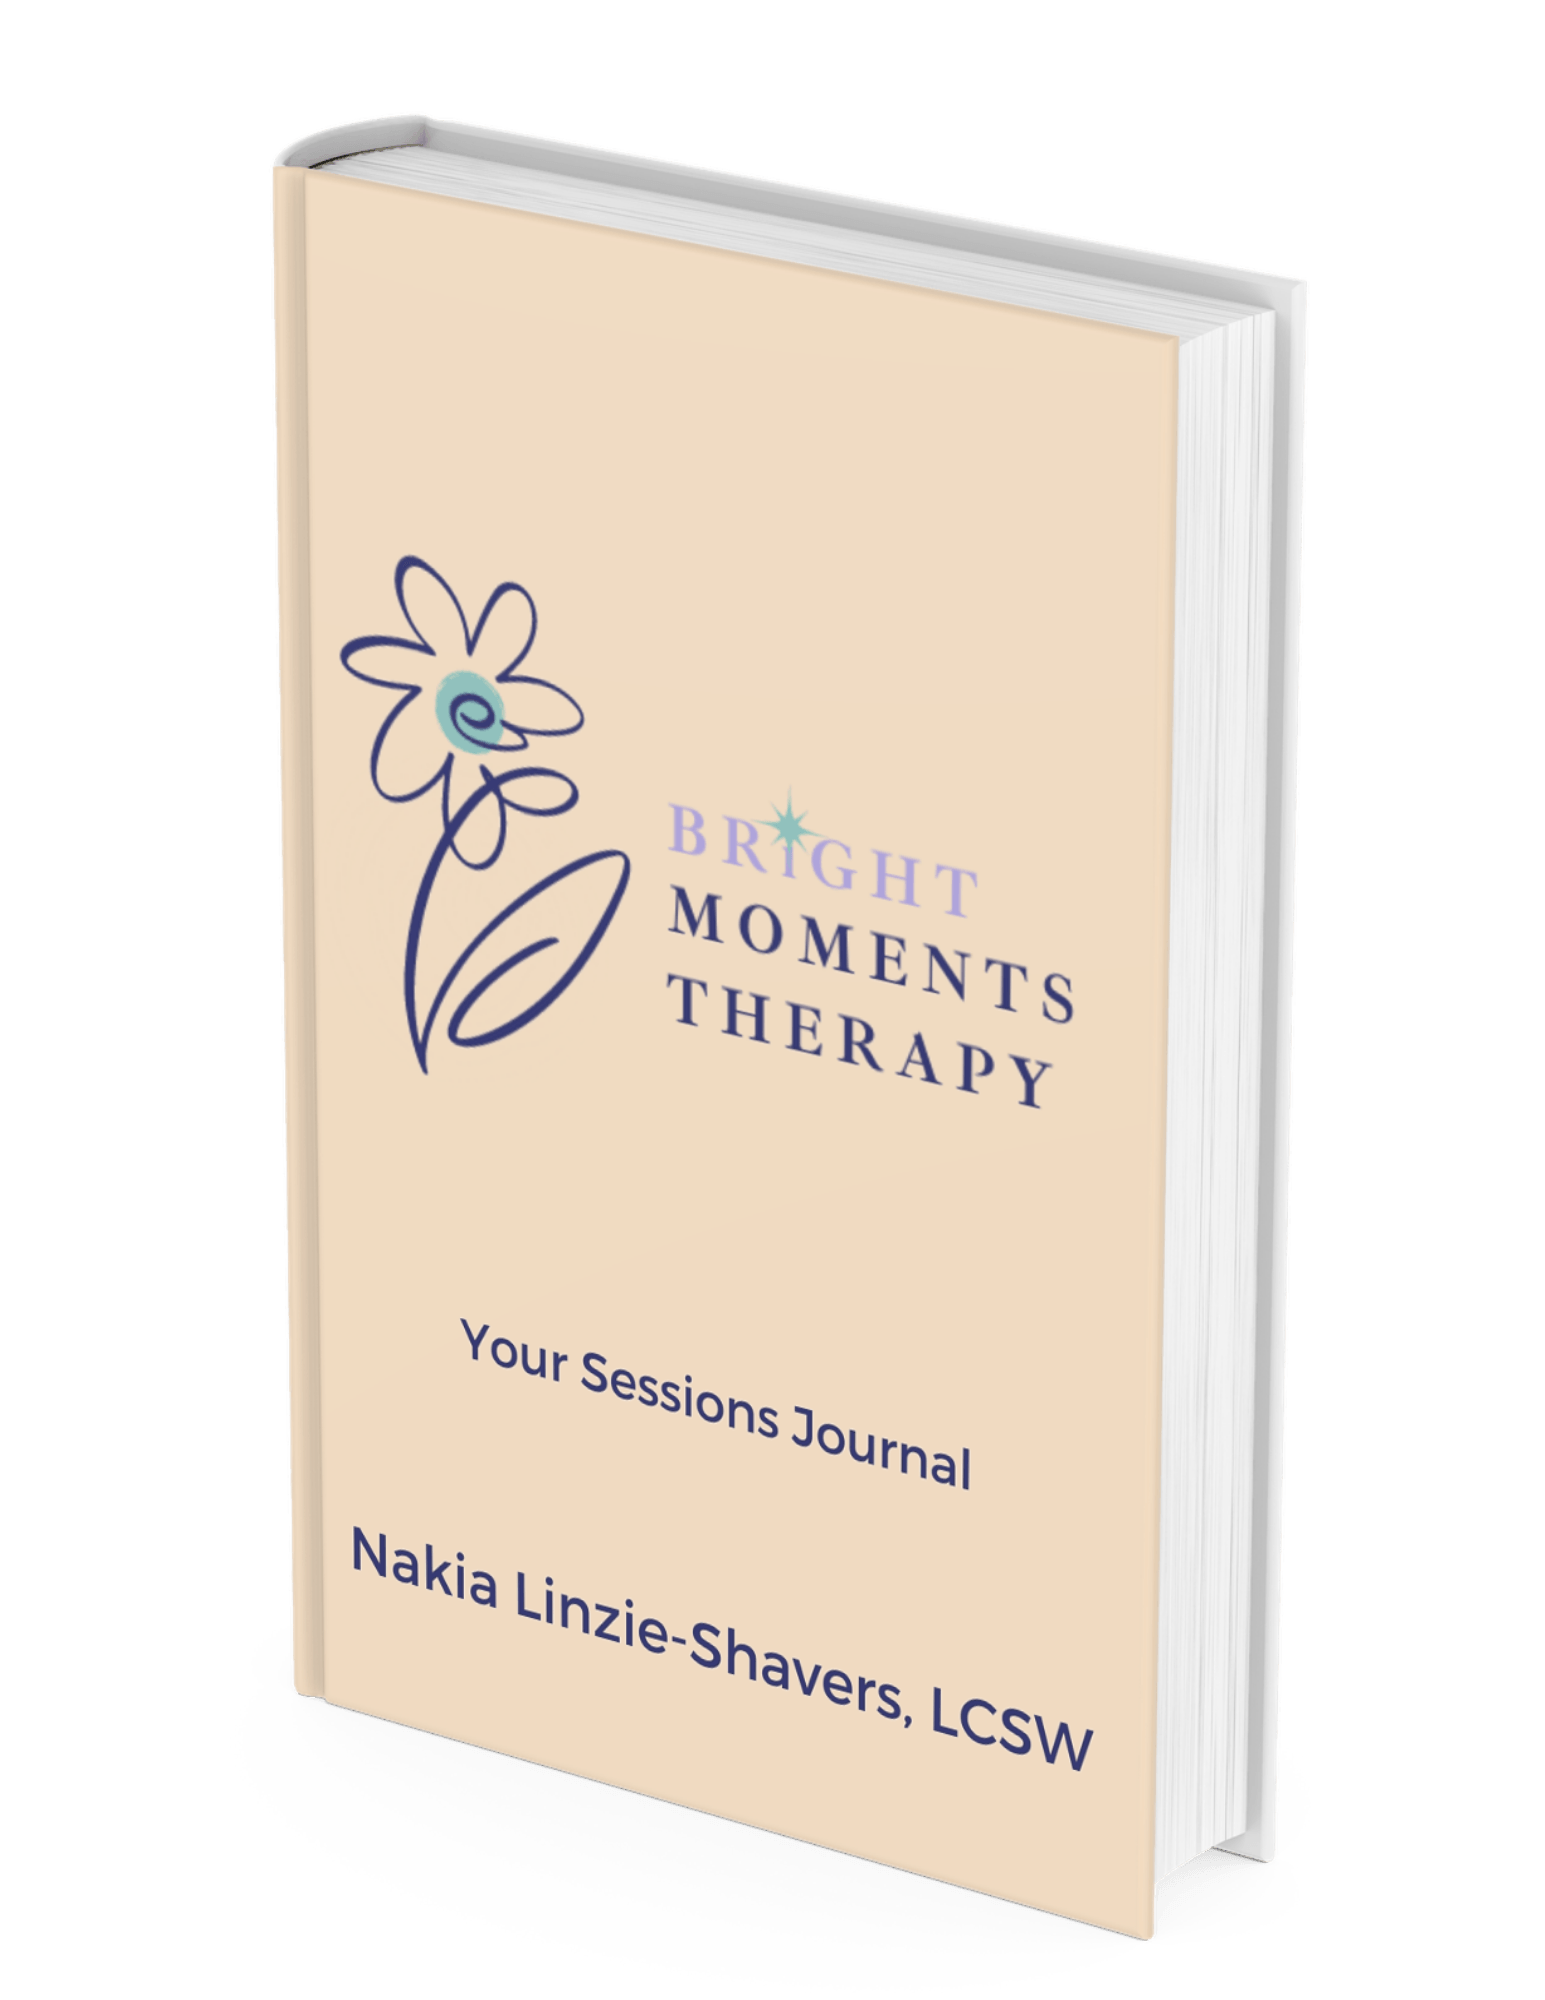 Sessions Journal from Bright Moments Therapy